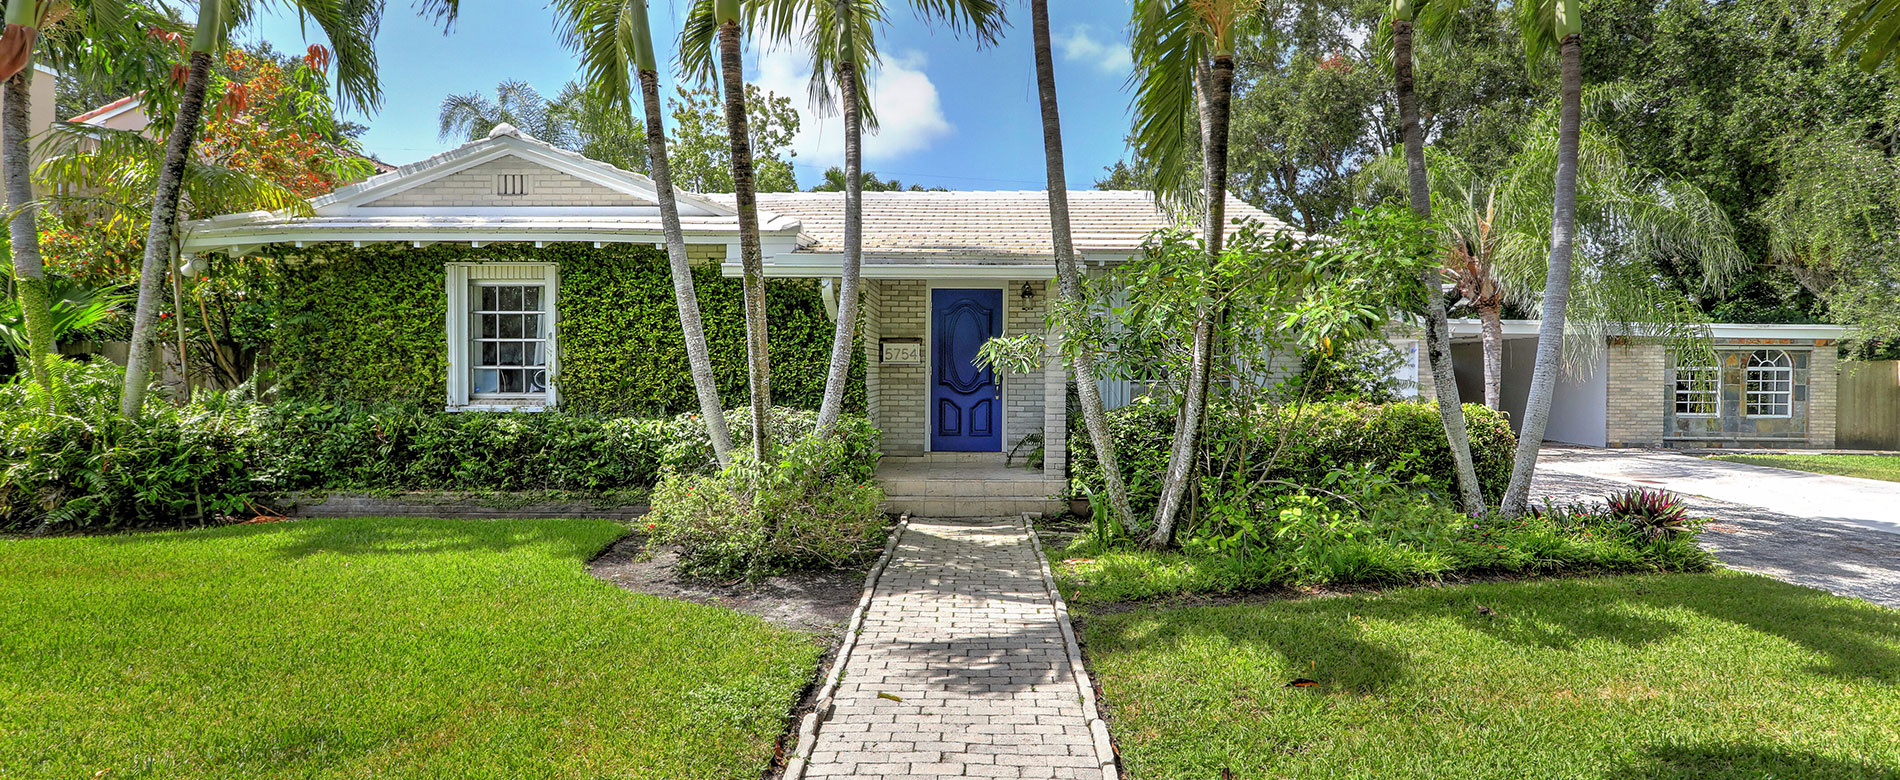 South Miami Home for Sale